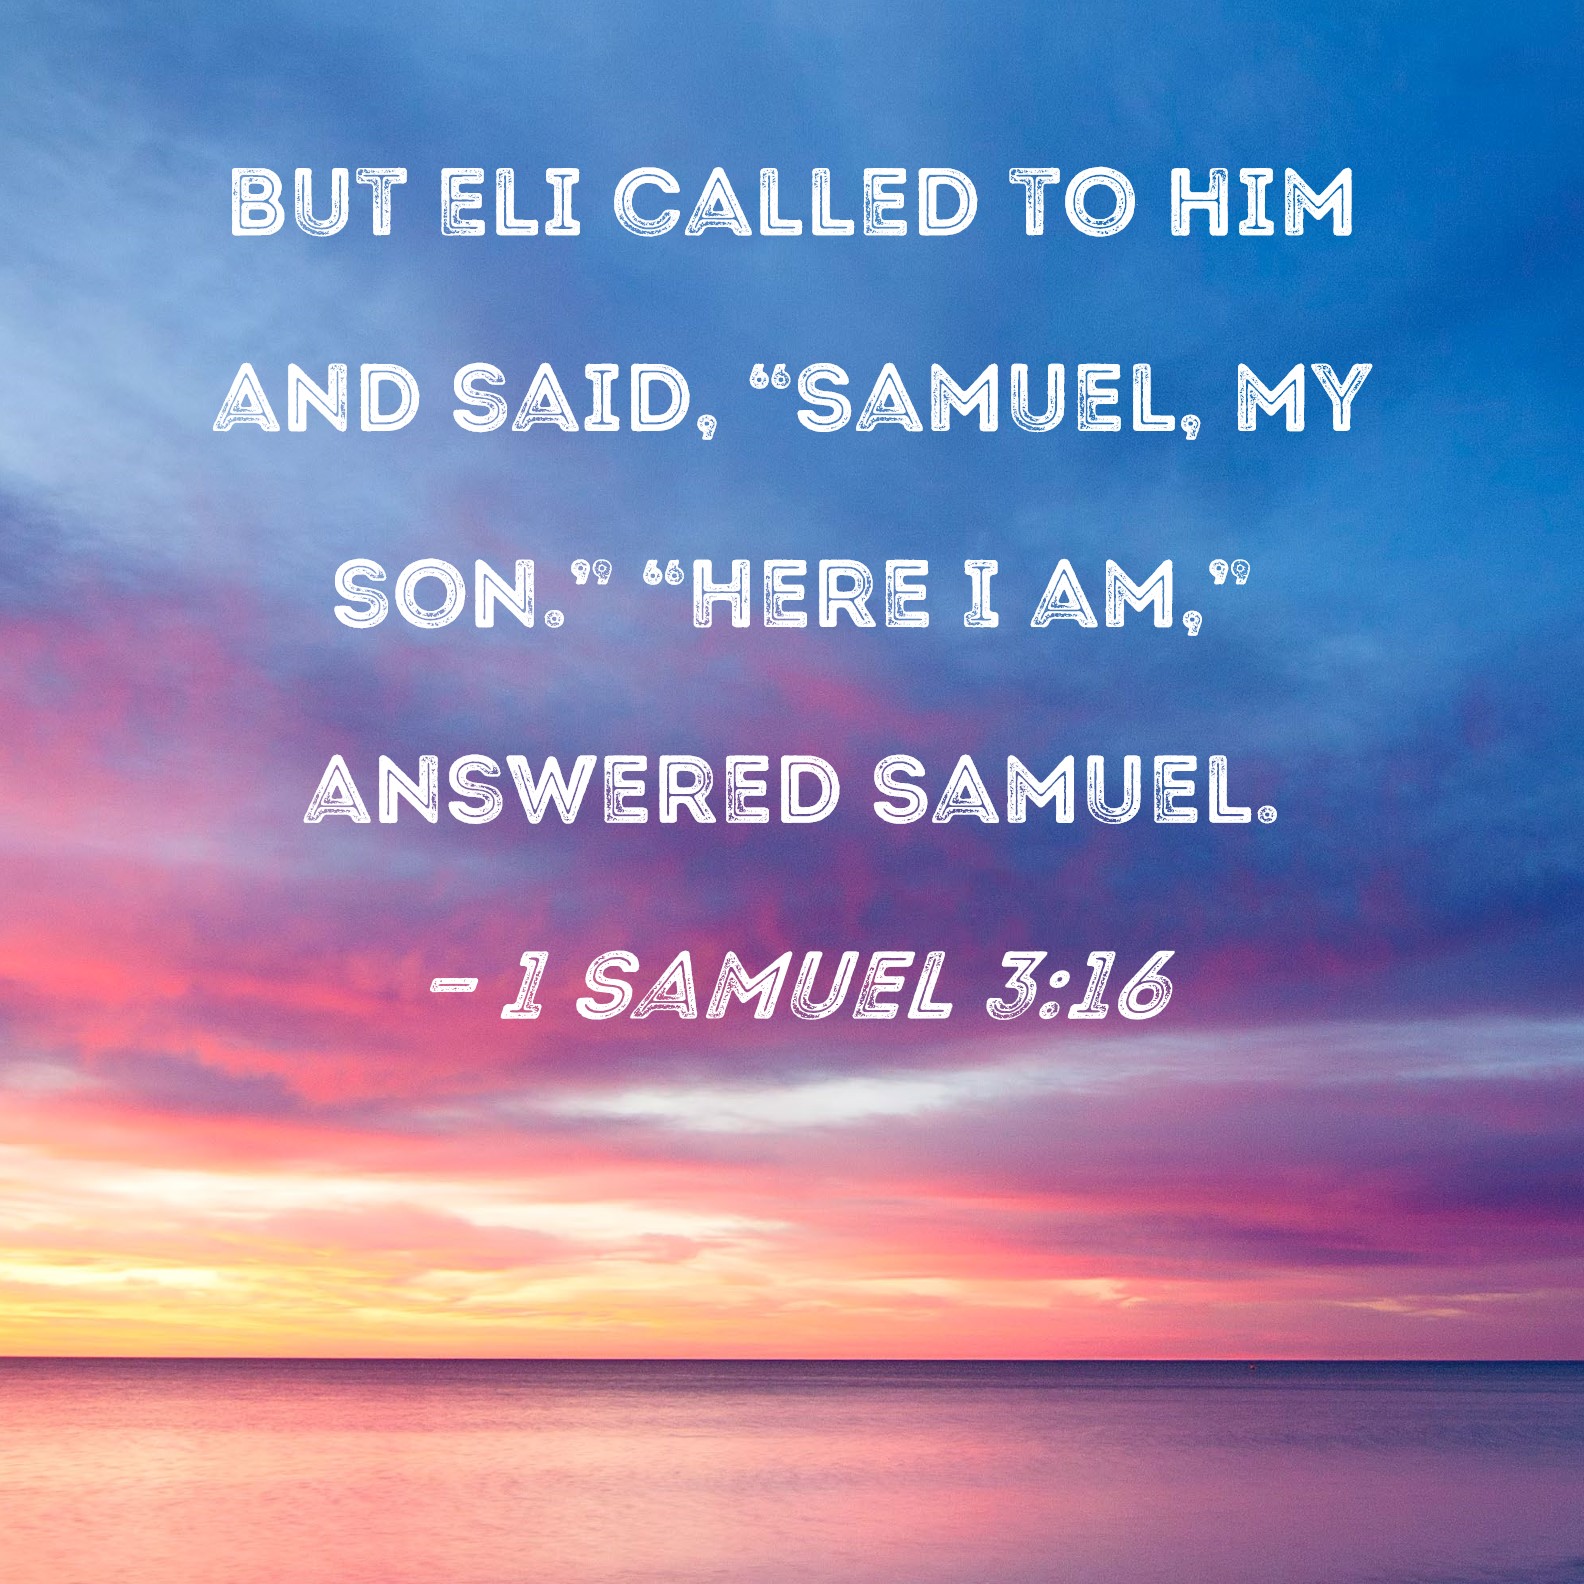 1 Samuel 3:16 but Eli called to him and said, 